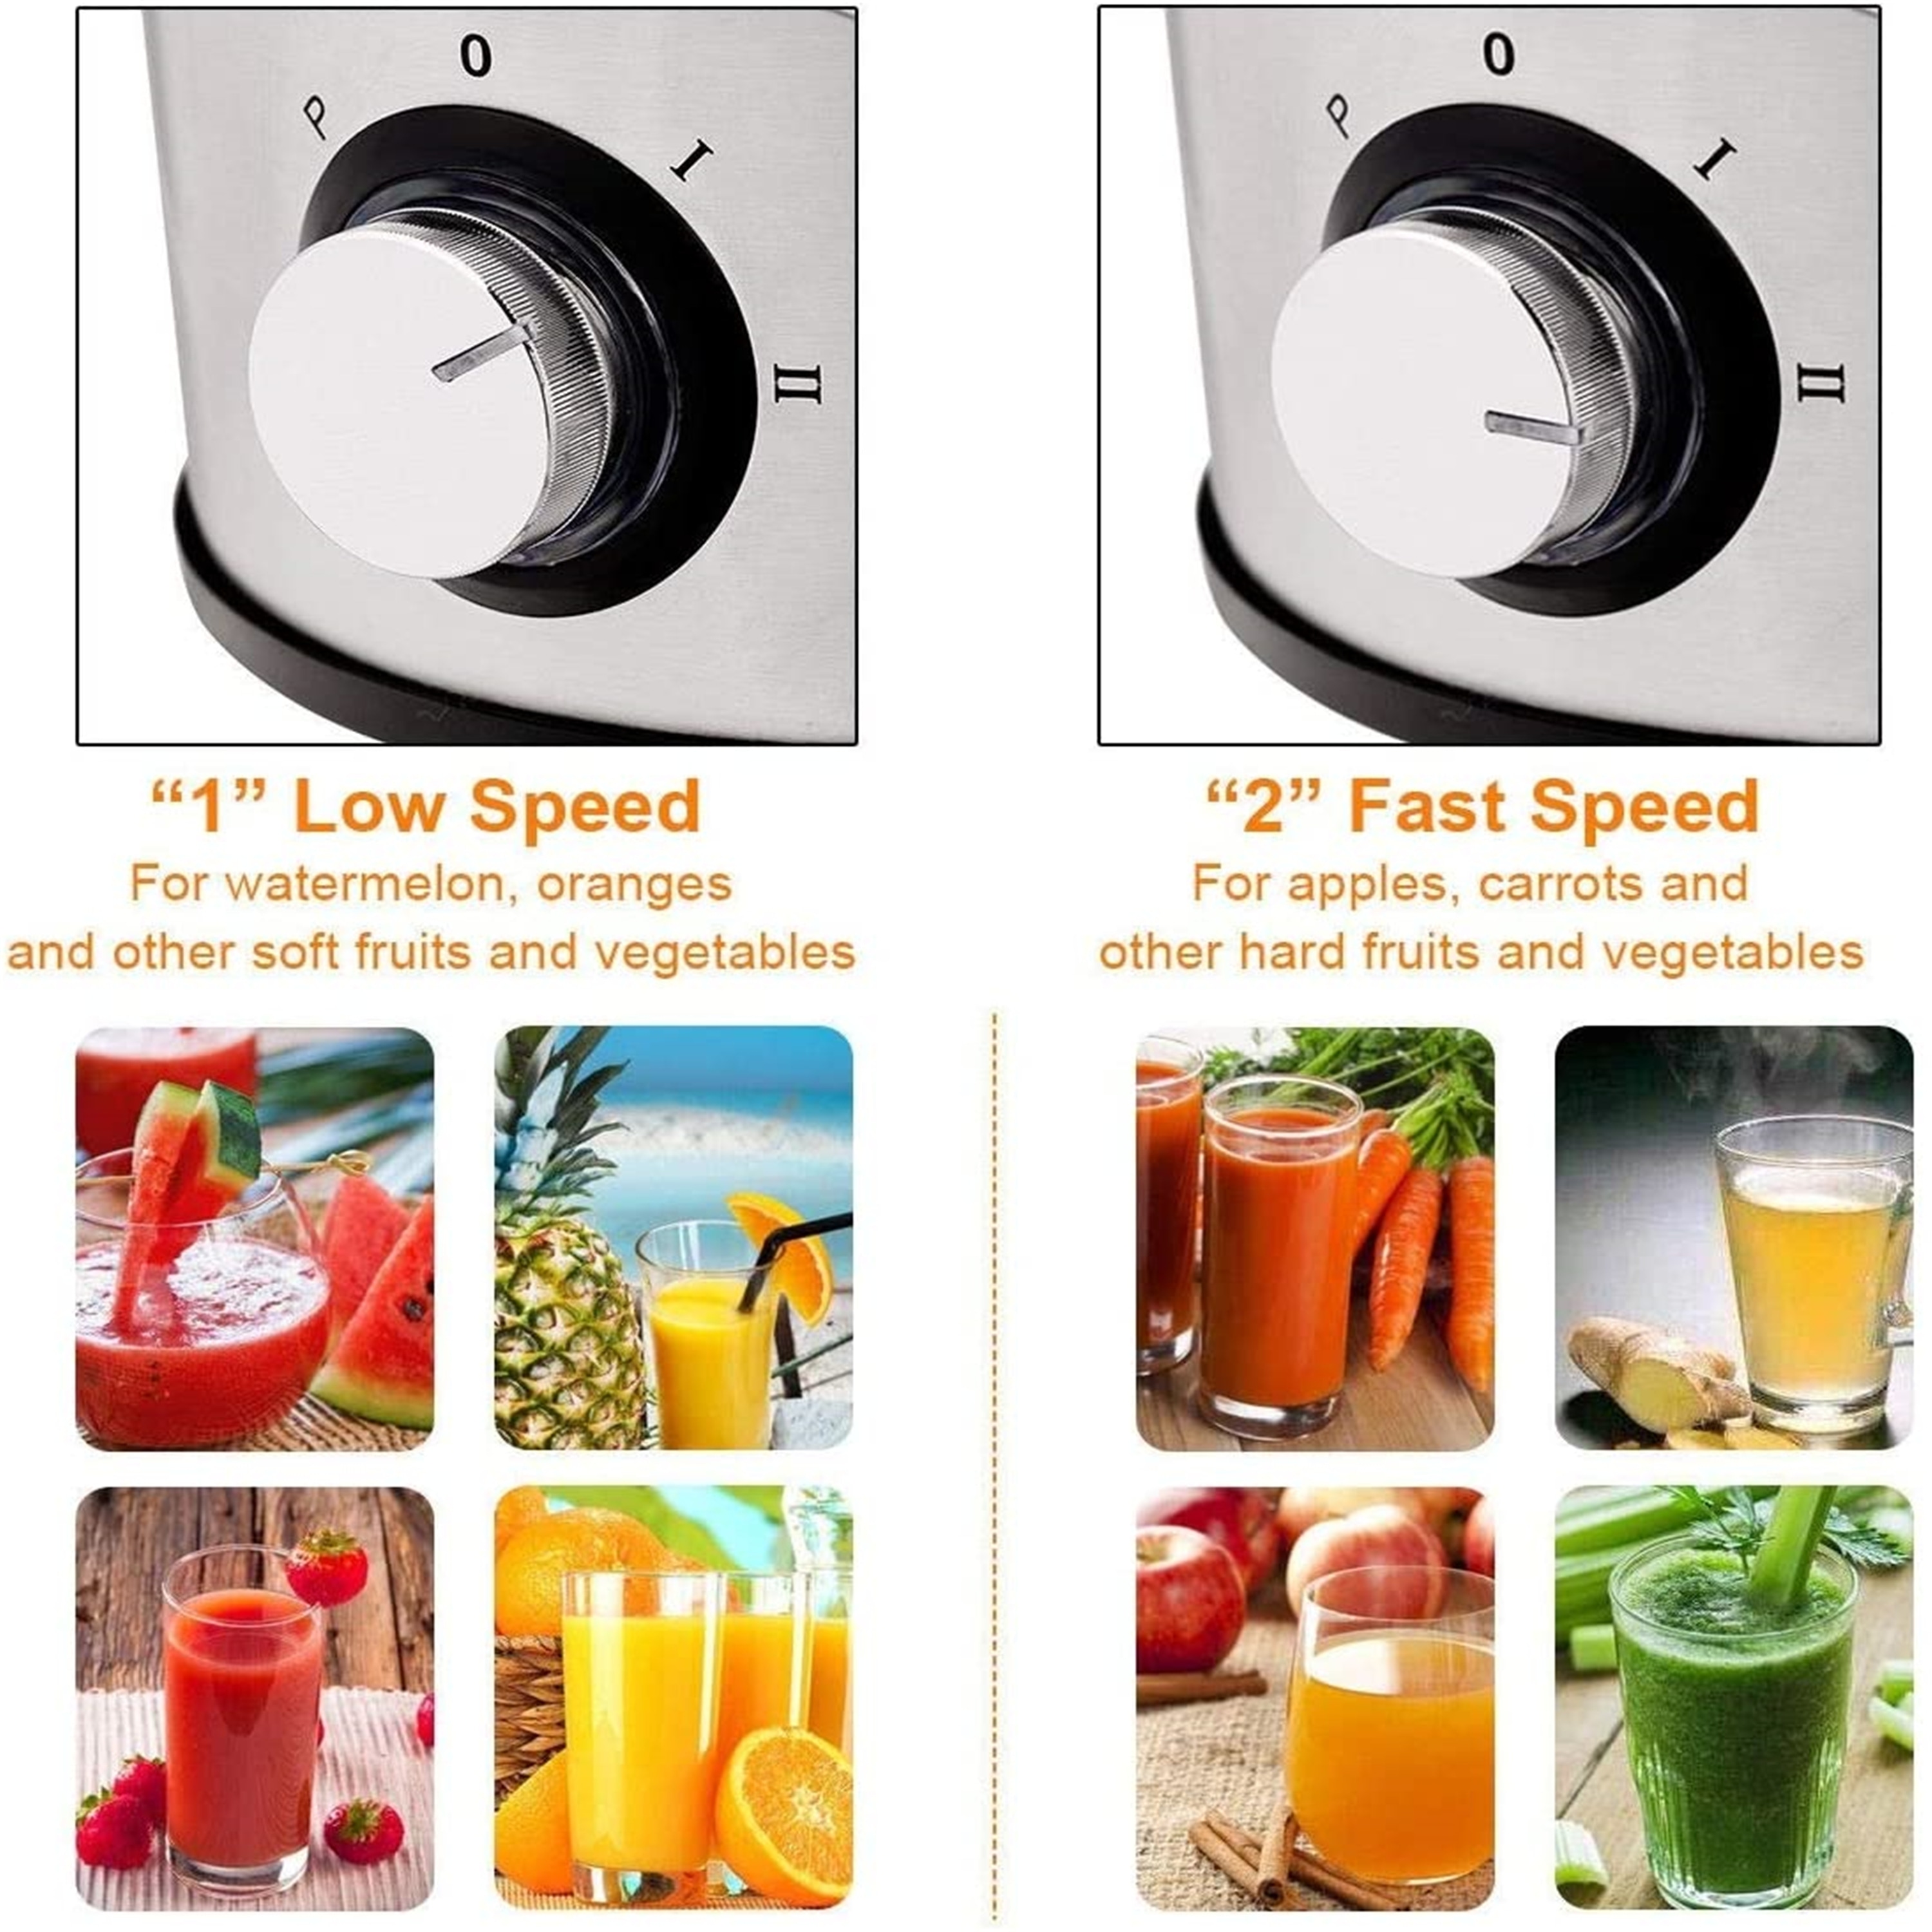 https://ak1.ostkcdn.com/images/products/is/images/direct/4f50a448aef3a3651aa1d779ad342072620d5ad1/Home-Kitchen-5-in-1-Multi-Function-Juice-Extractor-Blender-Grinder-Chopper-Food-Processor.jpg